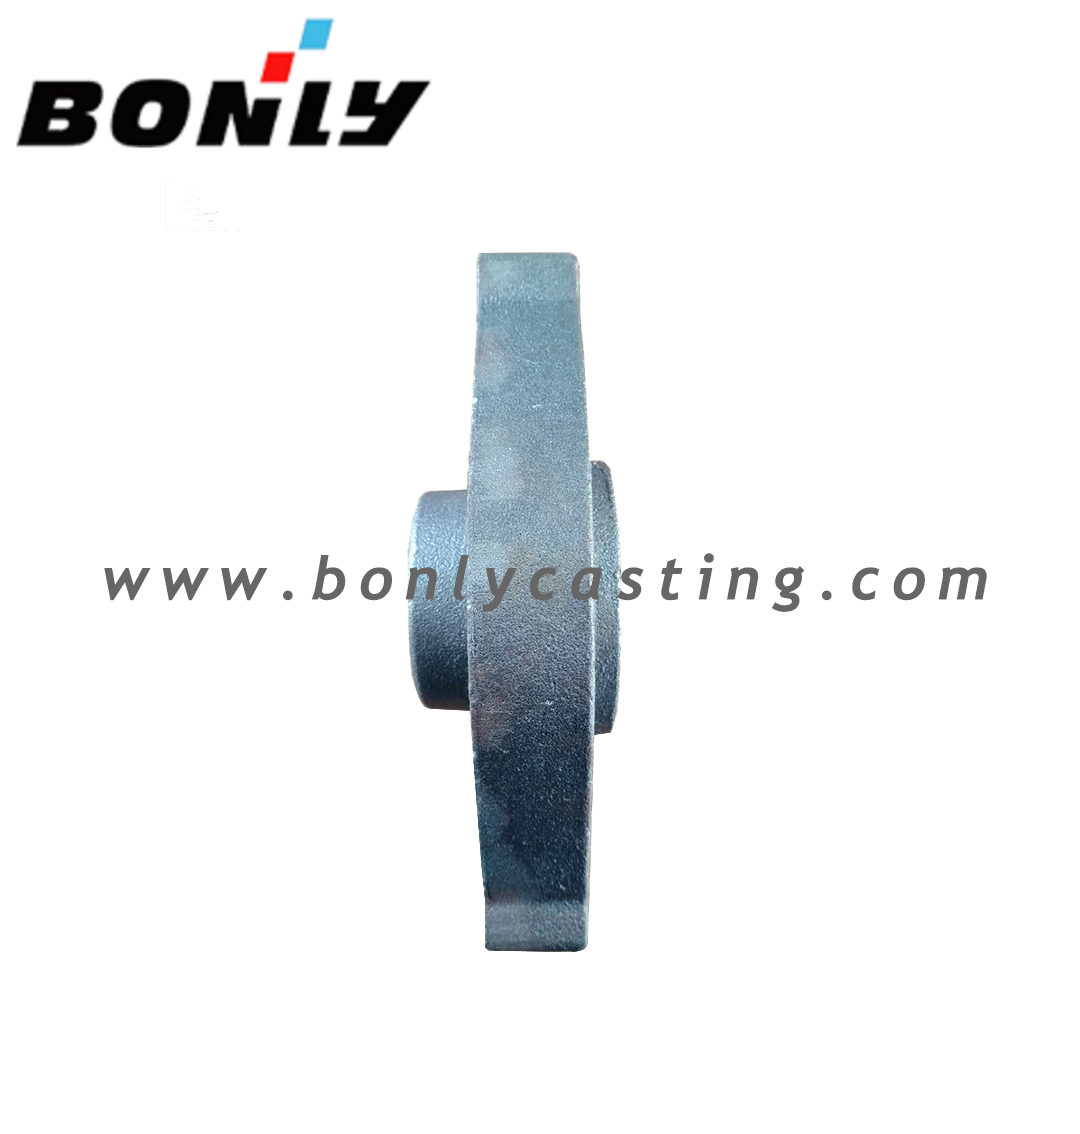 One of Hottest for - Anti-Wear Cast Iron sand coated casting Anti Wear Mechanical parts – Fuyang Bonly